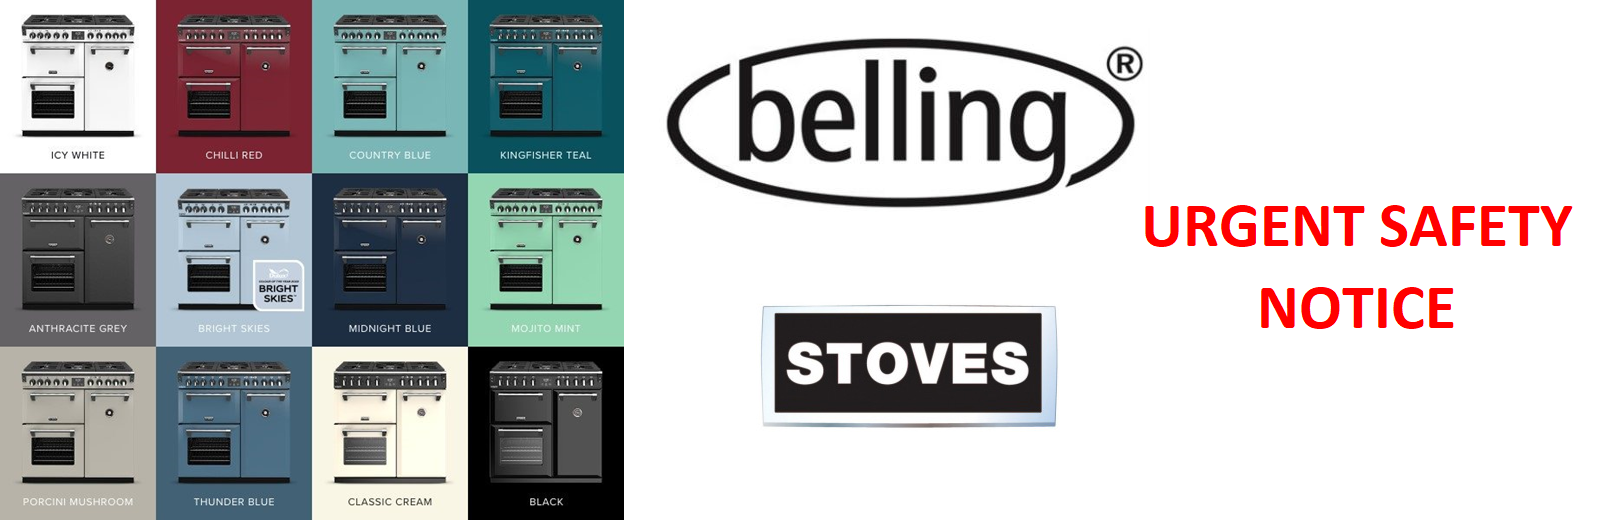 Belling - Stoves Recall